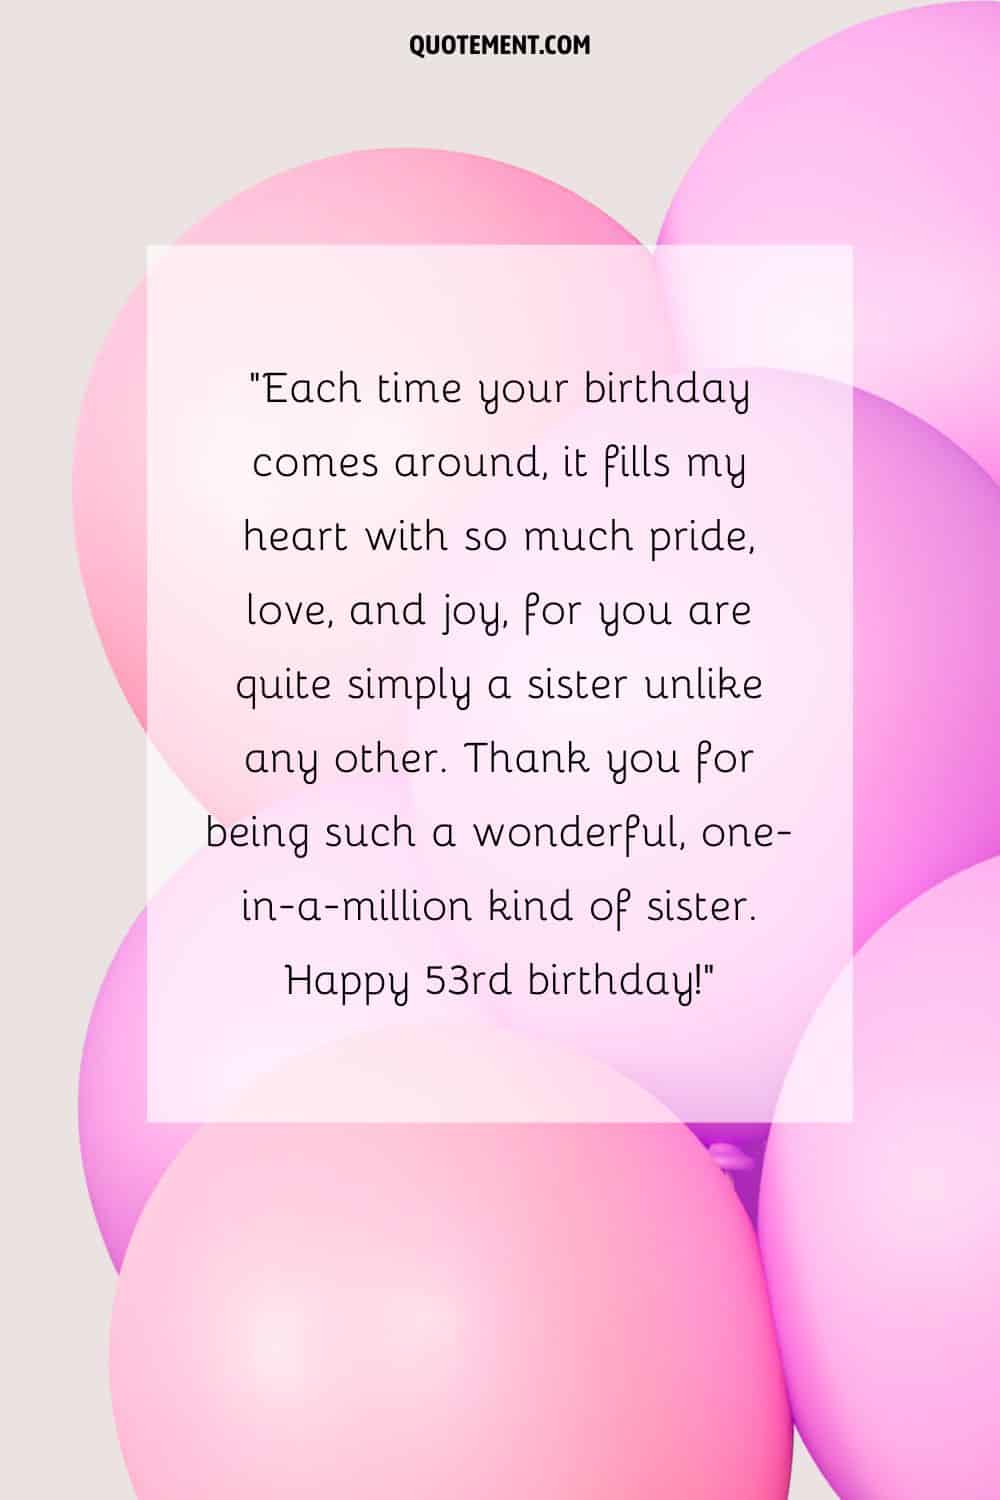 Touching message for a sister's 53rd birthday and pink and purple balloons in the background